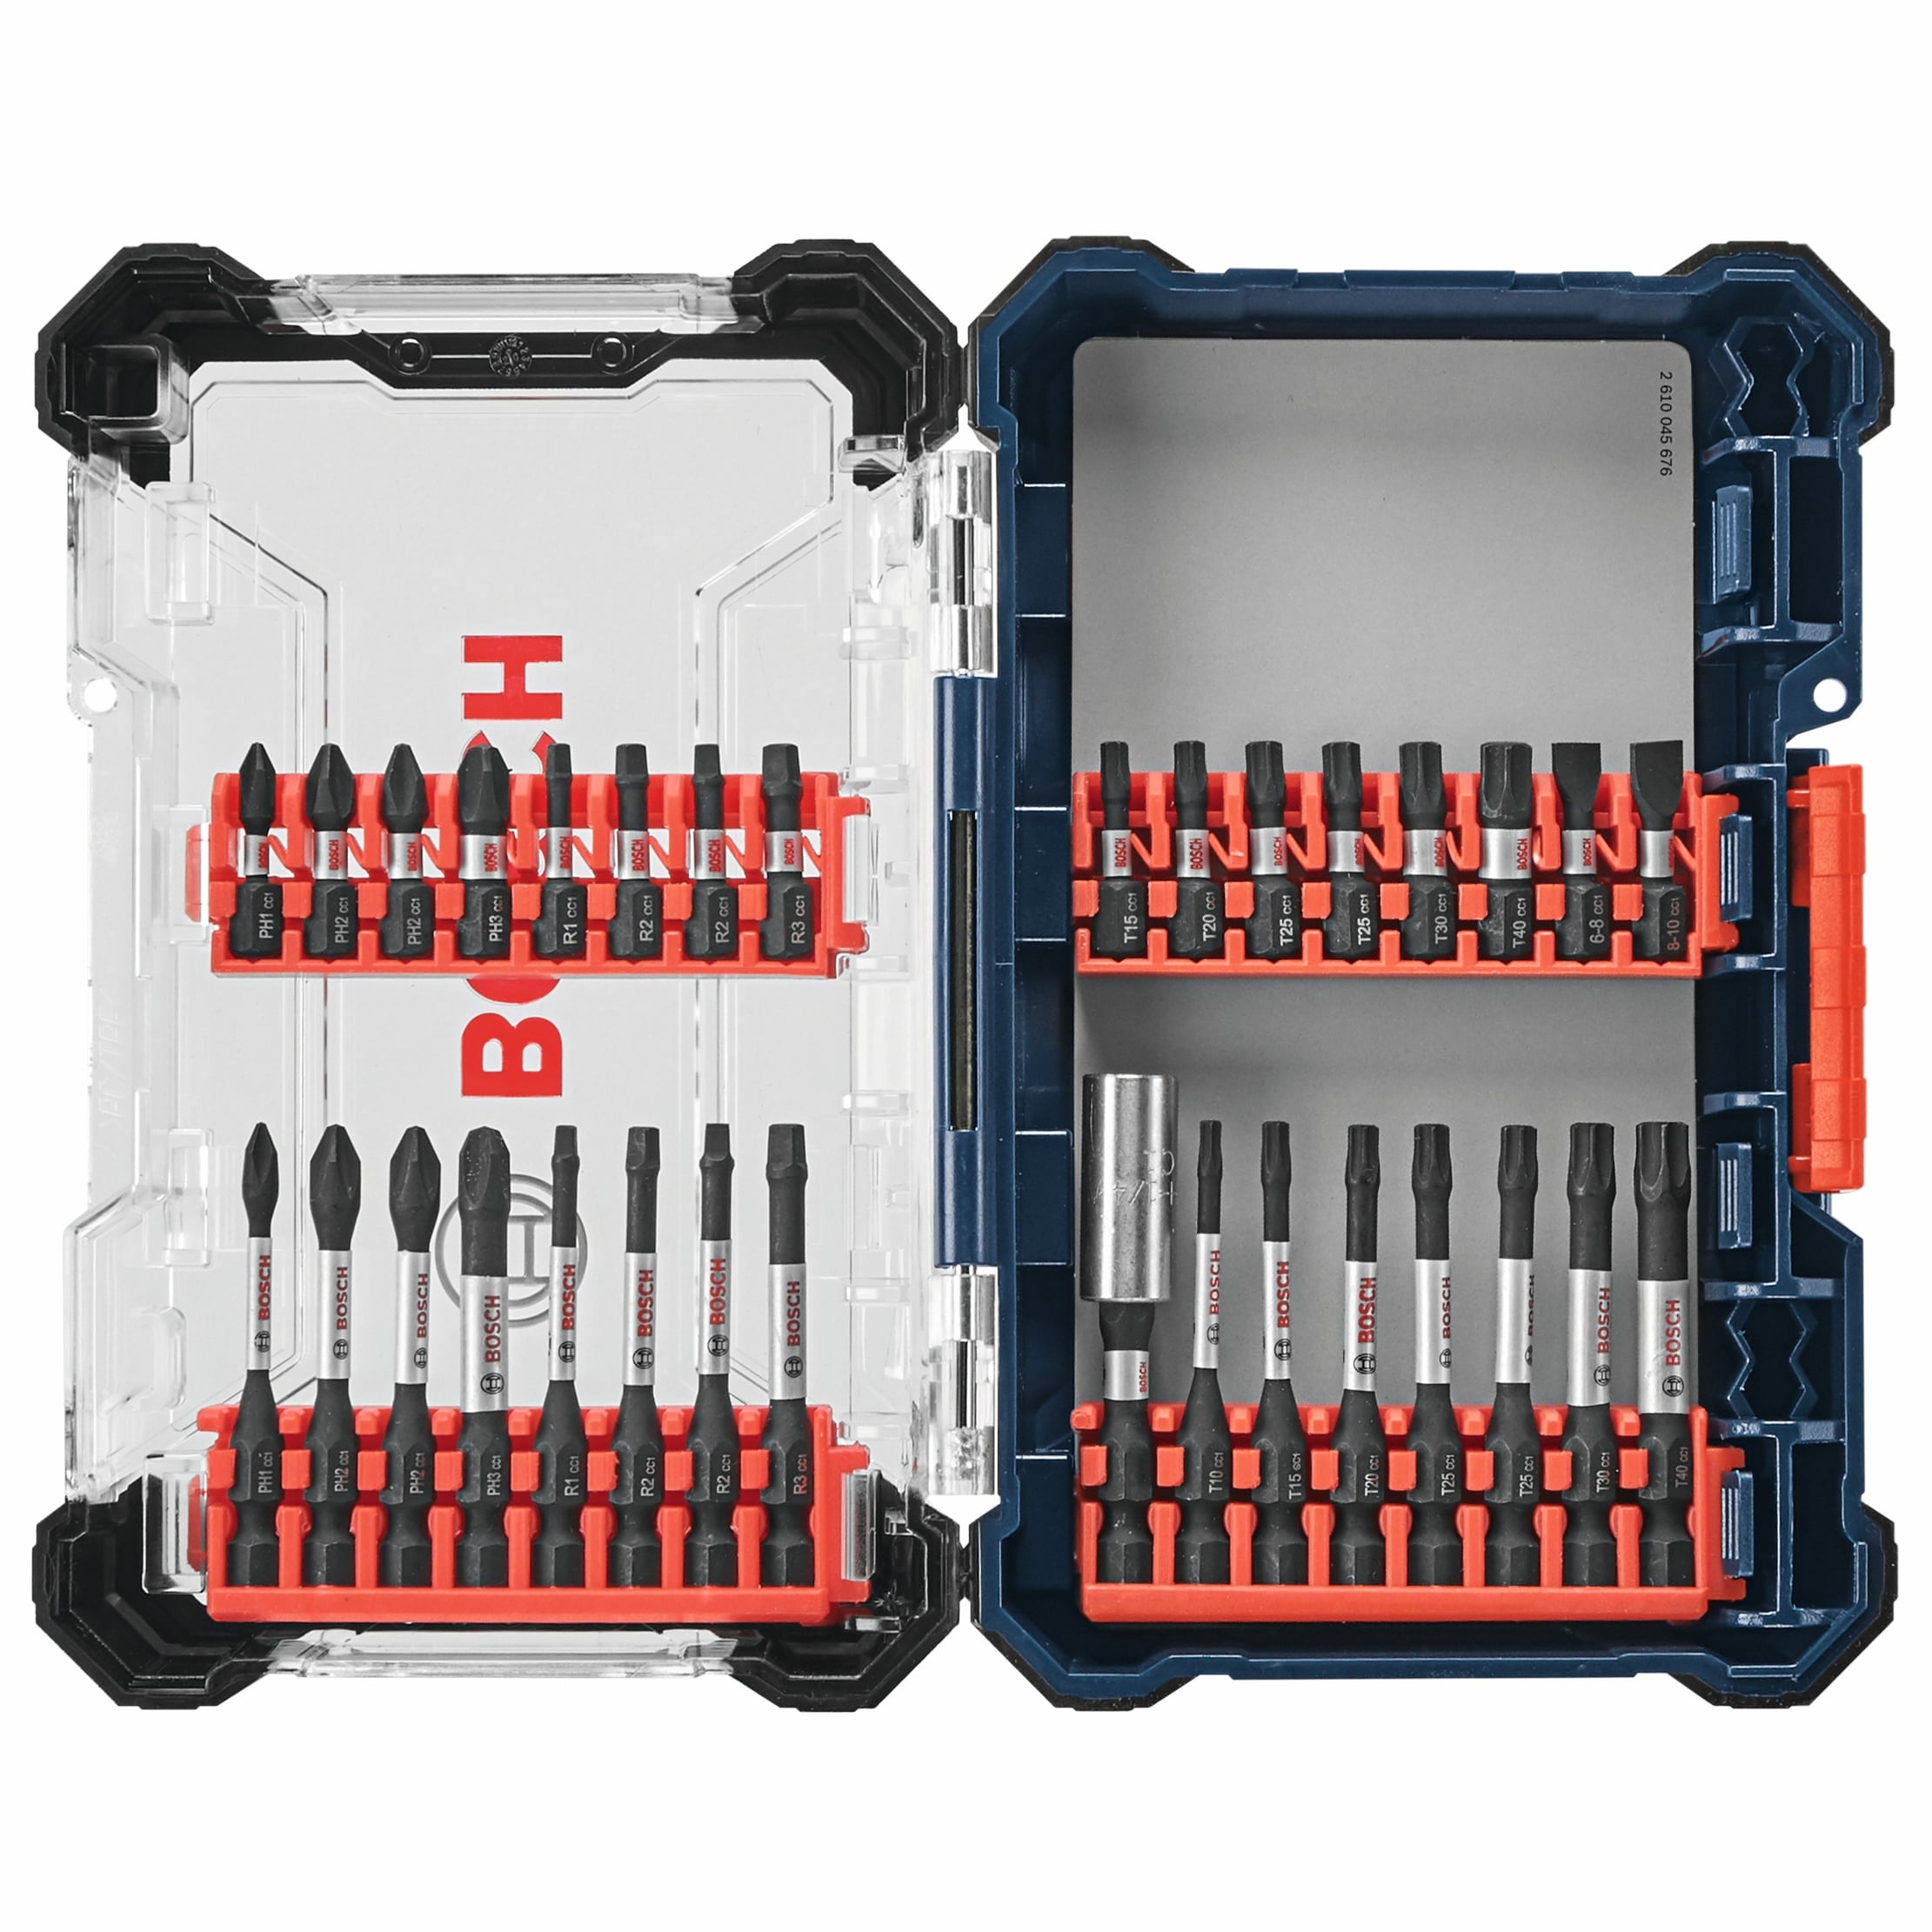 Driver the Driver (32-Piece) Bits Bit DrivenSet Impact Impact at in Bosch department